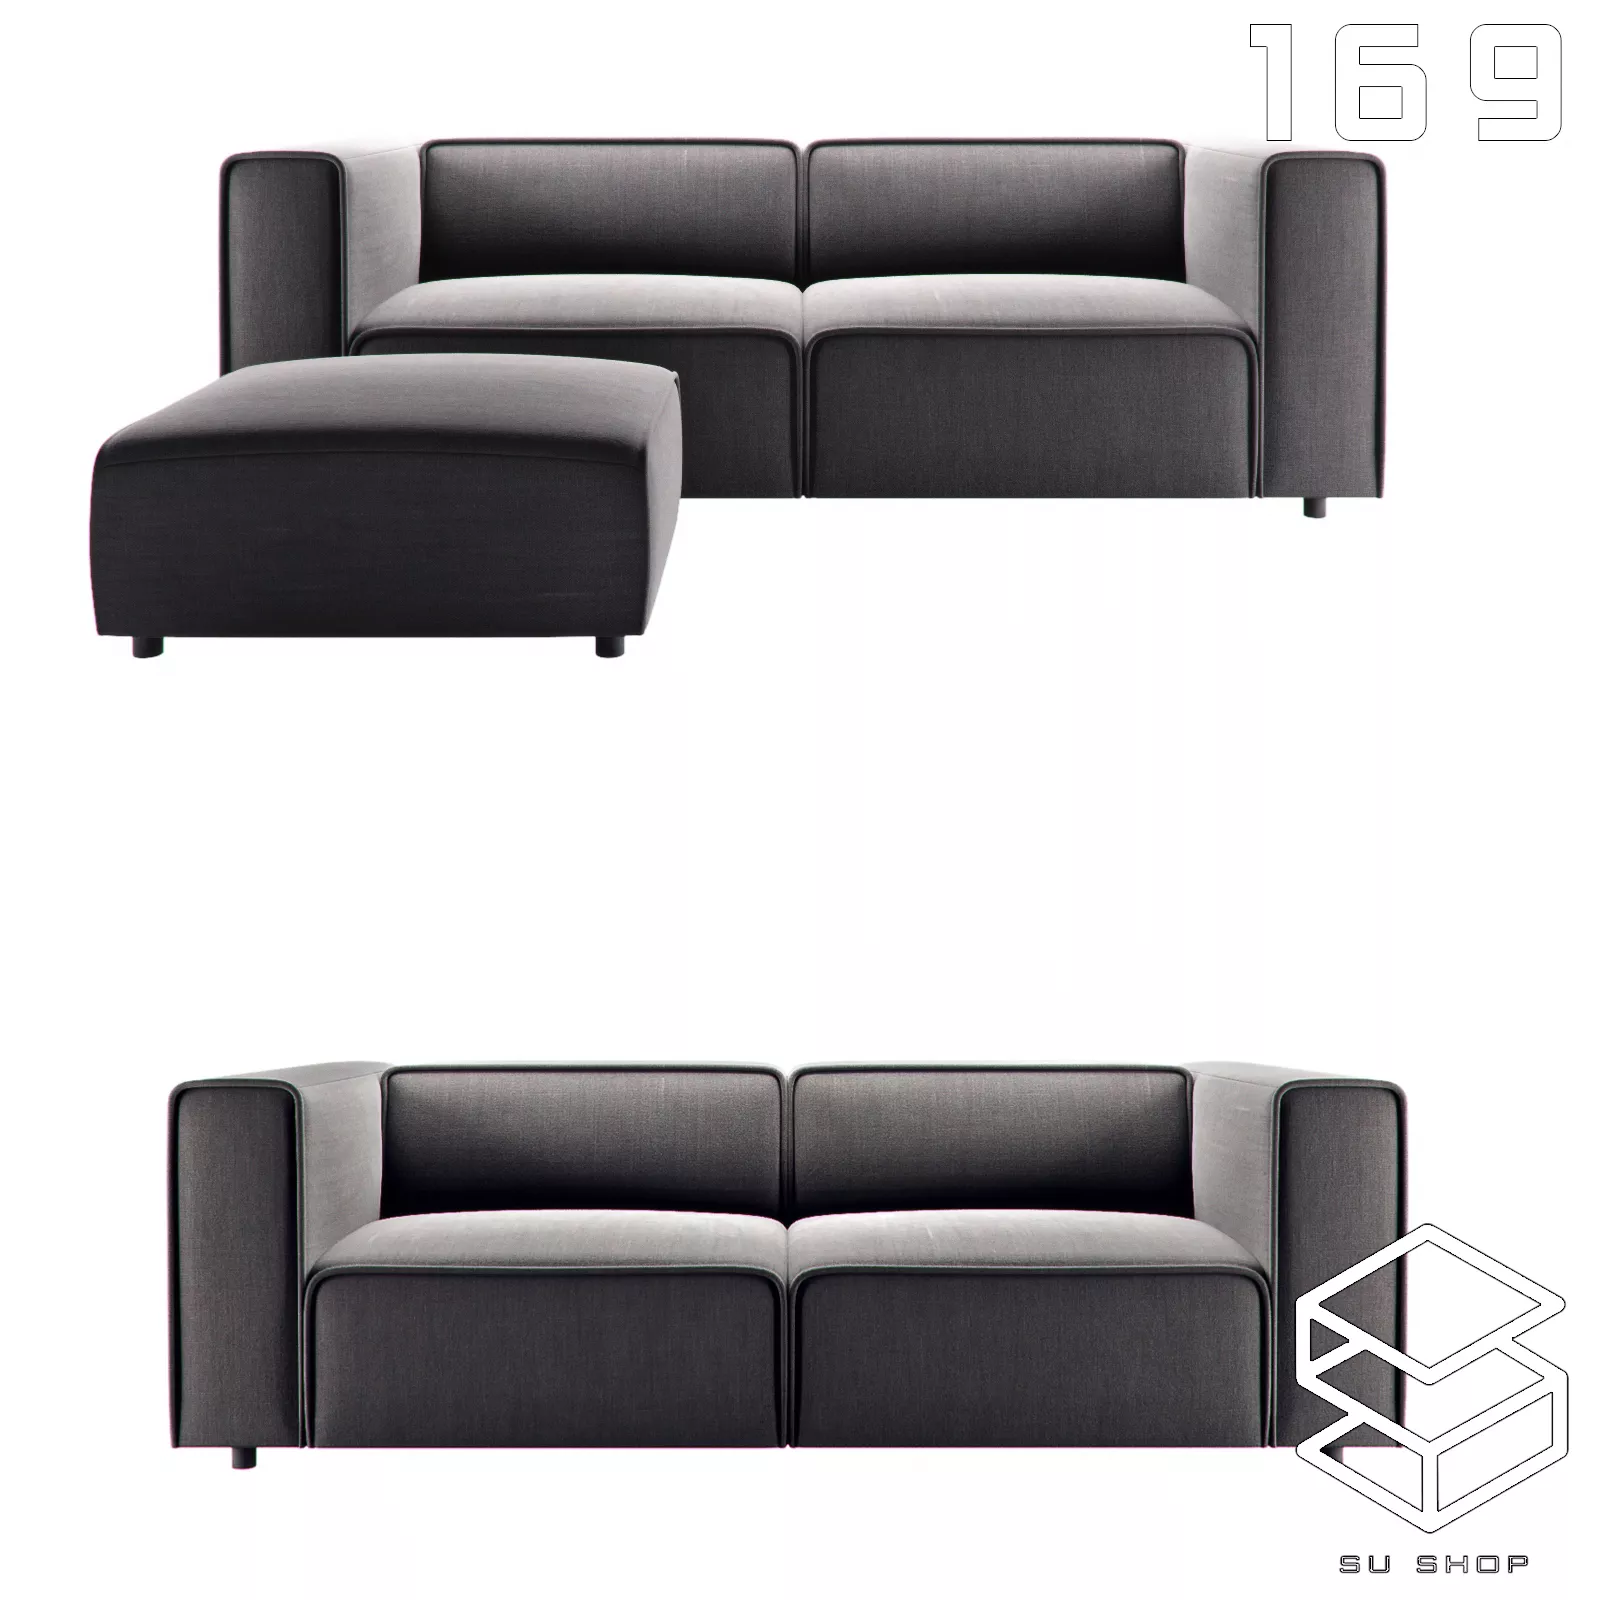 MODERN SOFA - SKETCHUP 3D MODEL - VRAY OR ENSCAPE - ID13462